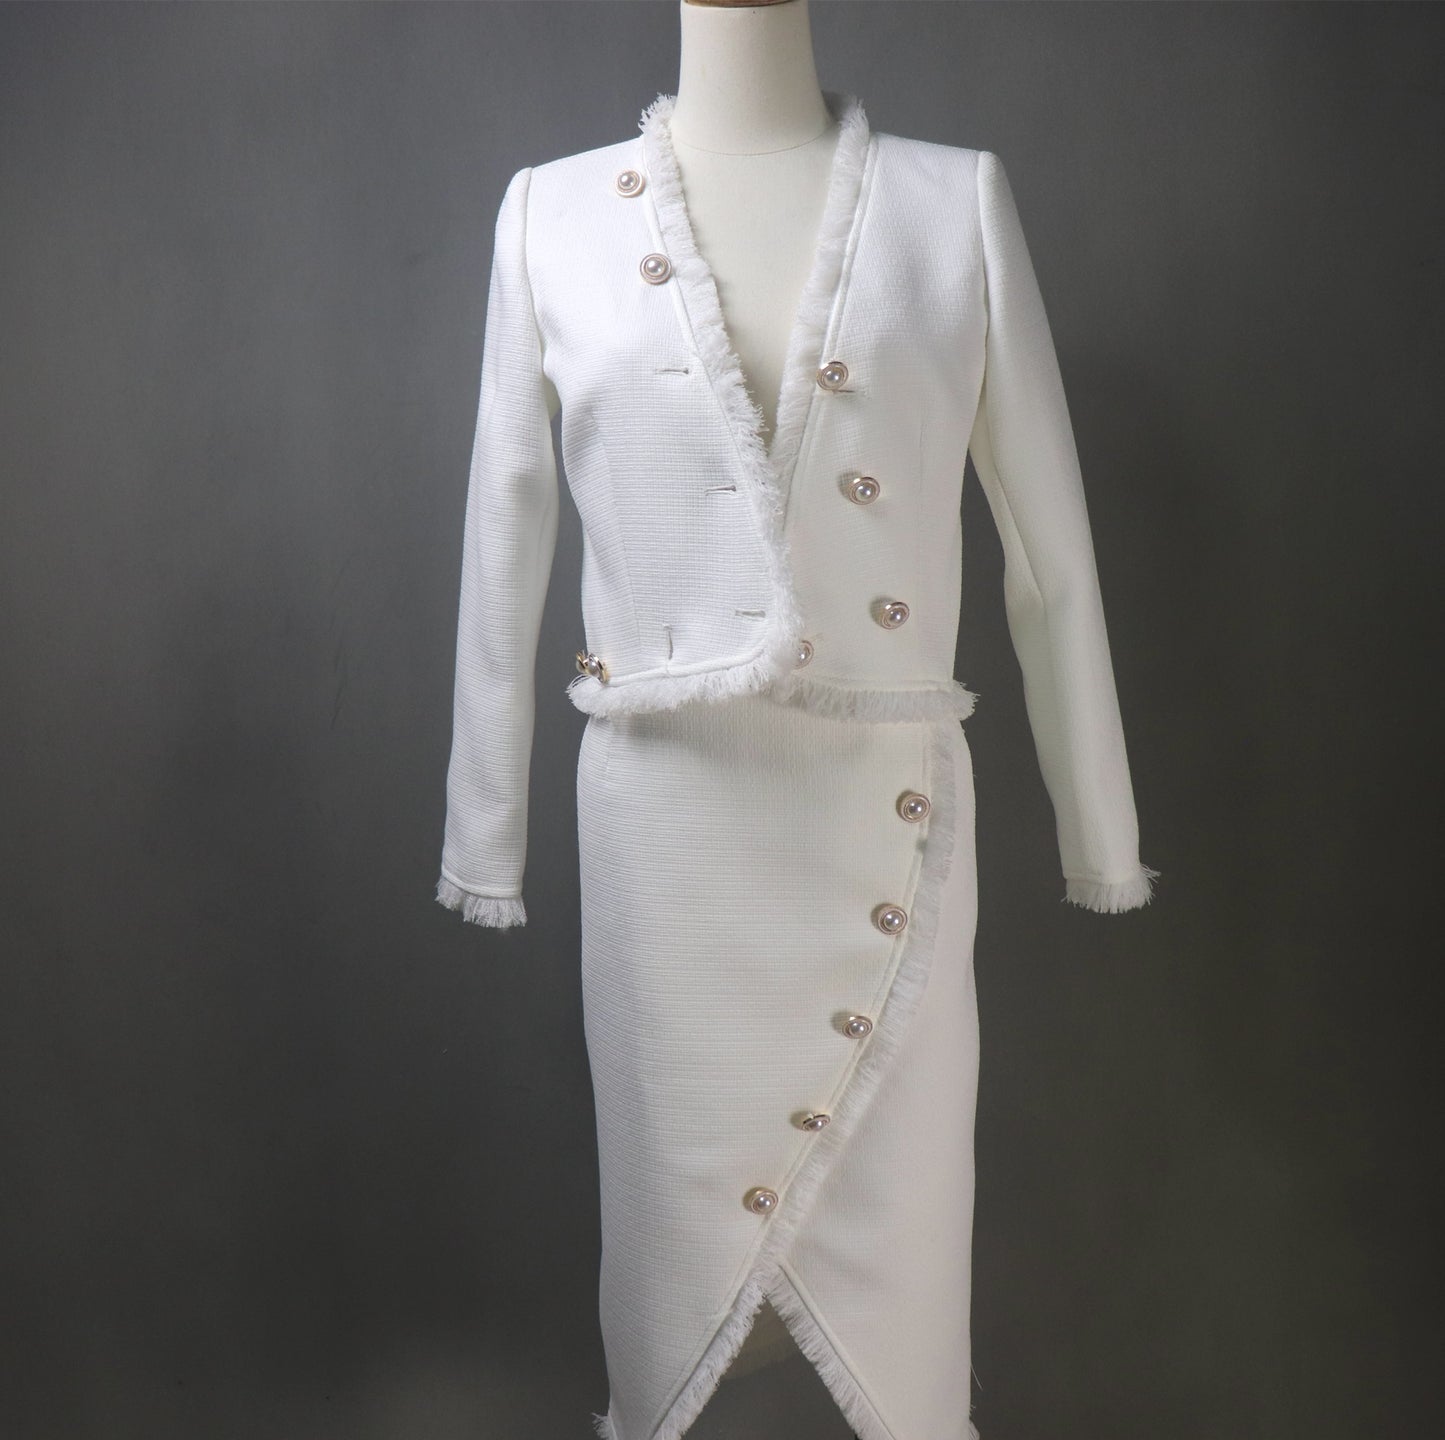 White Asymmetric Skirt Tweed Suit with Big Pearls